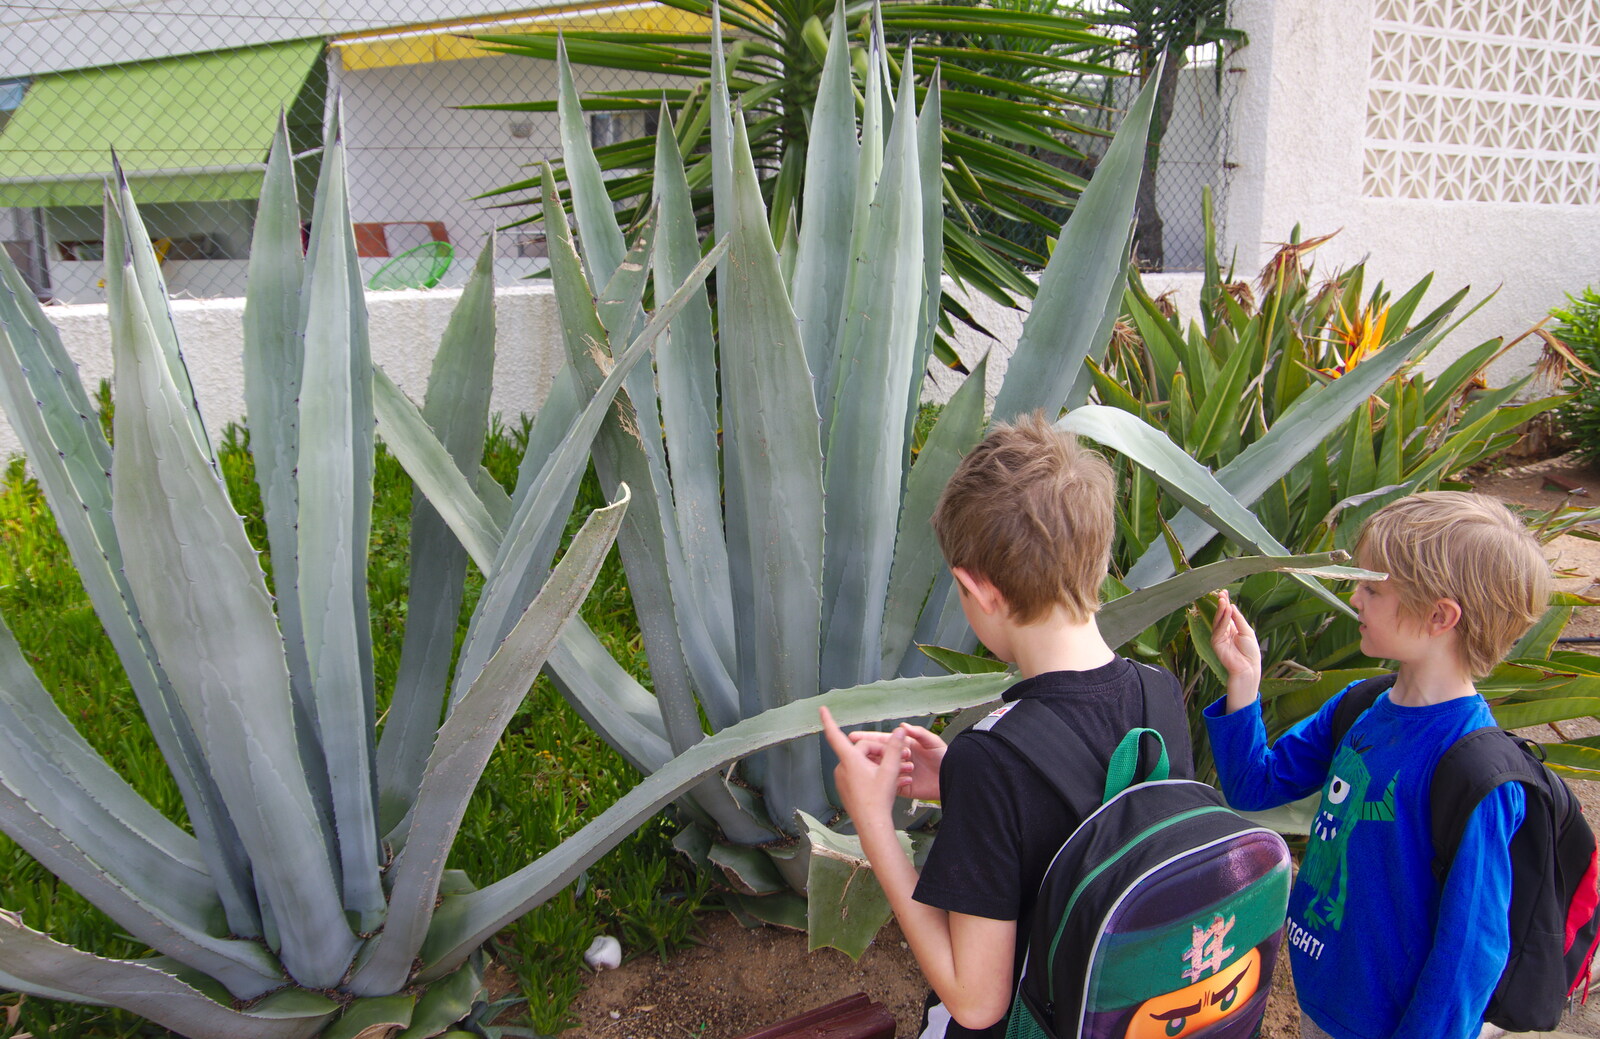 The boys check out the spiky plants from Torrecilla Beach and the Nerja Museum, Andalusia, Spain - 17th April 2019